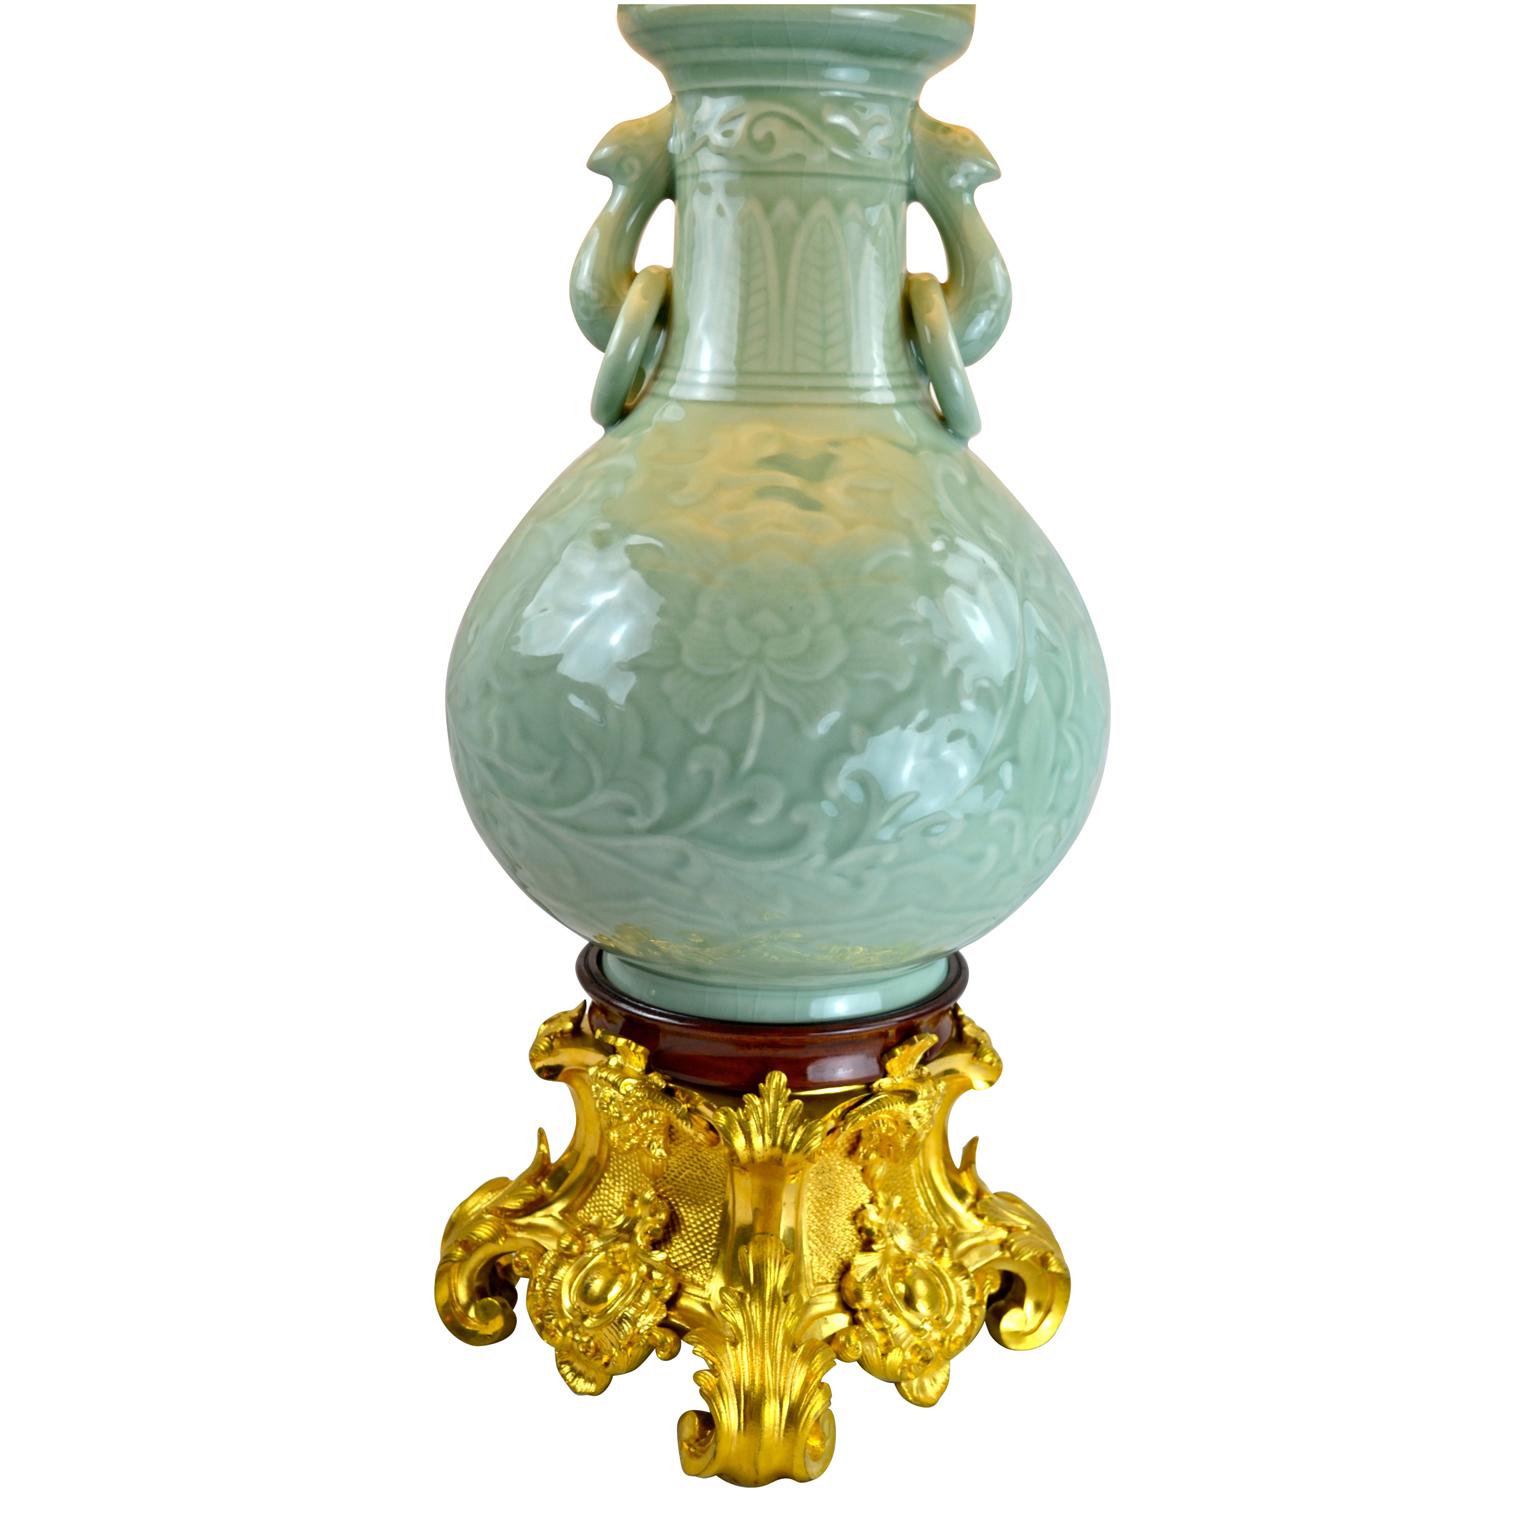 A Chinese celadon baluster vase lamp (likely 20th century porcelain) with loose ring handles on its neck. The vase is now set on a large scale finely chased and gilded bronze 19th century base of French origin.
  
 